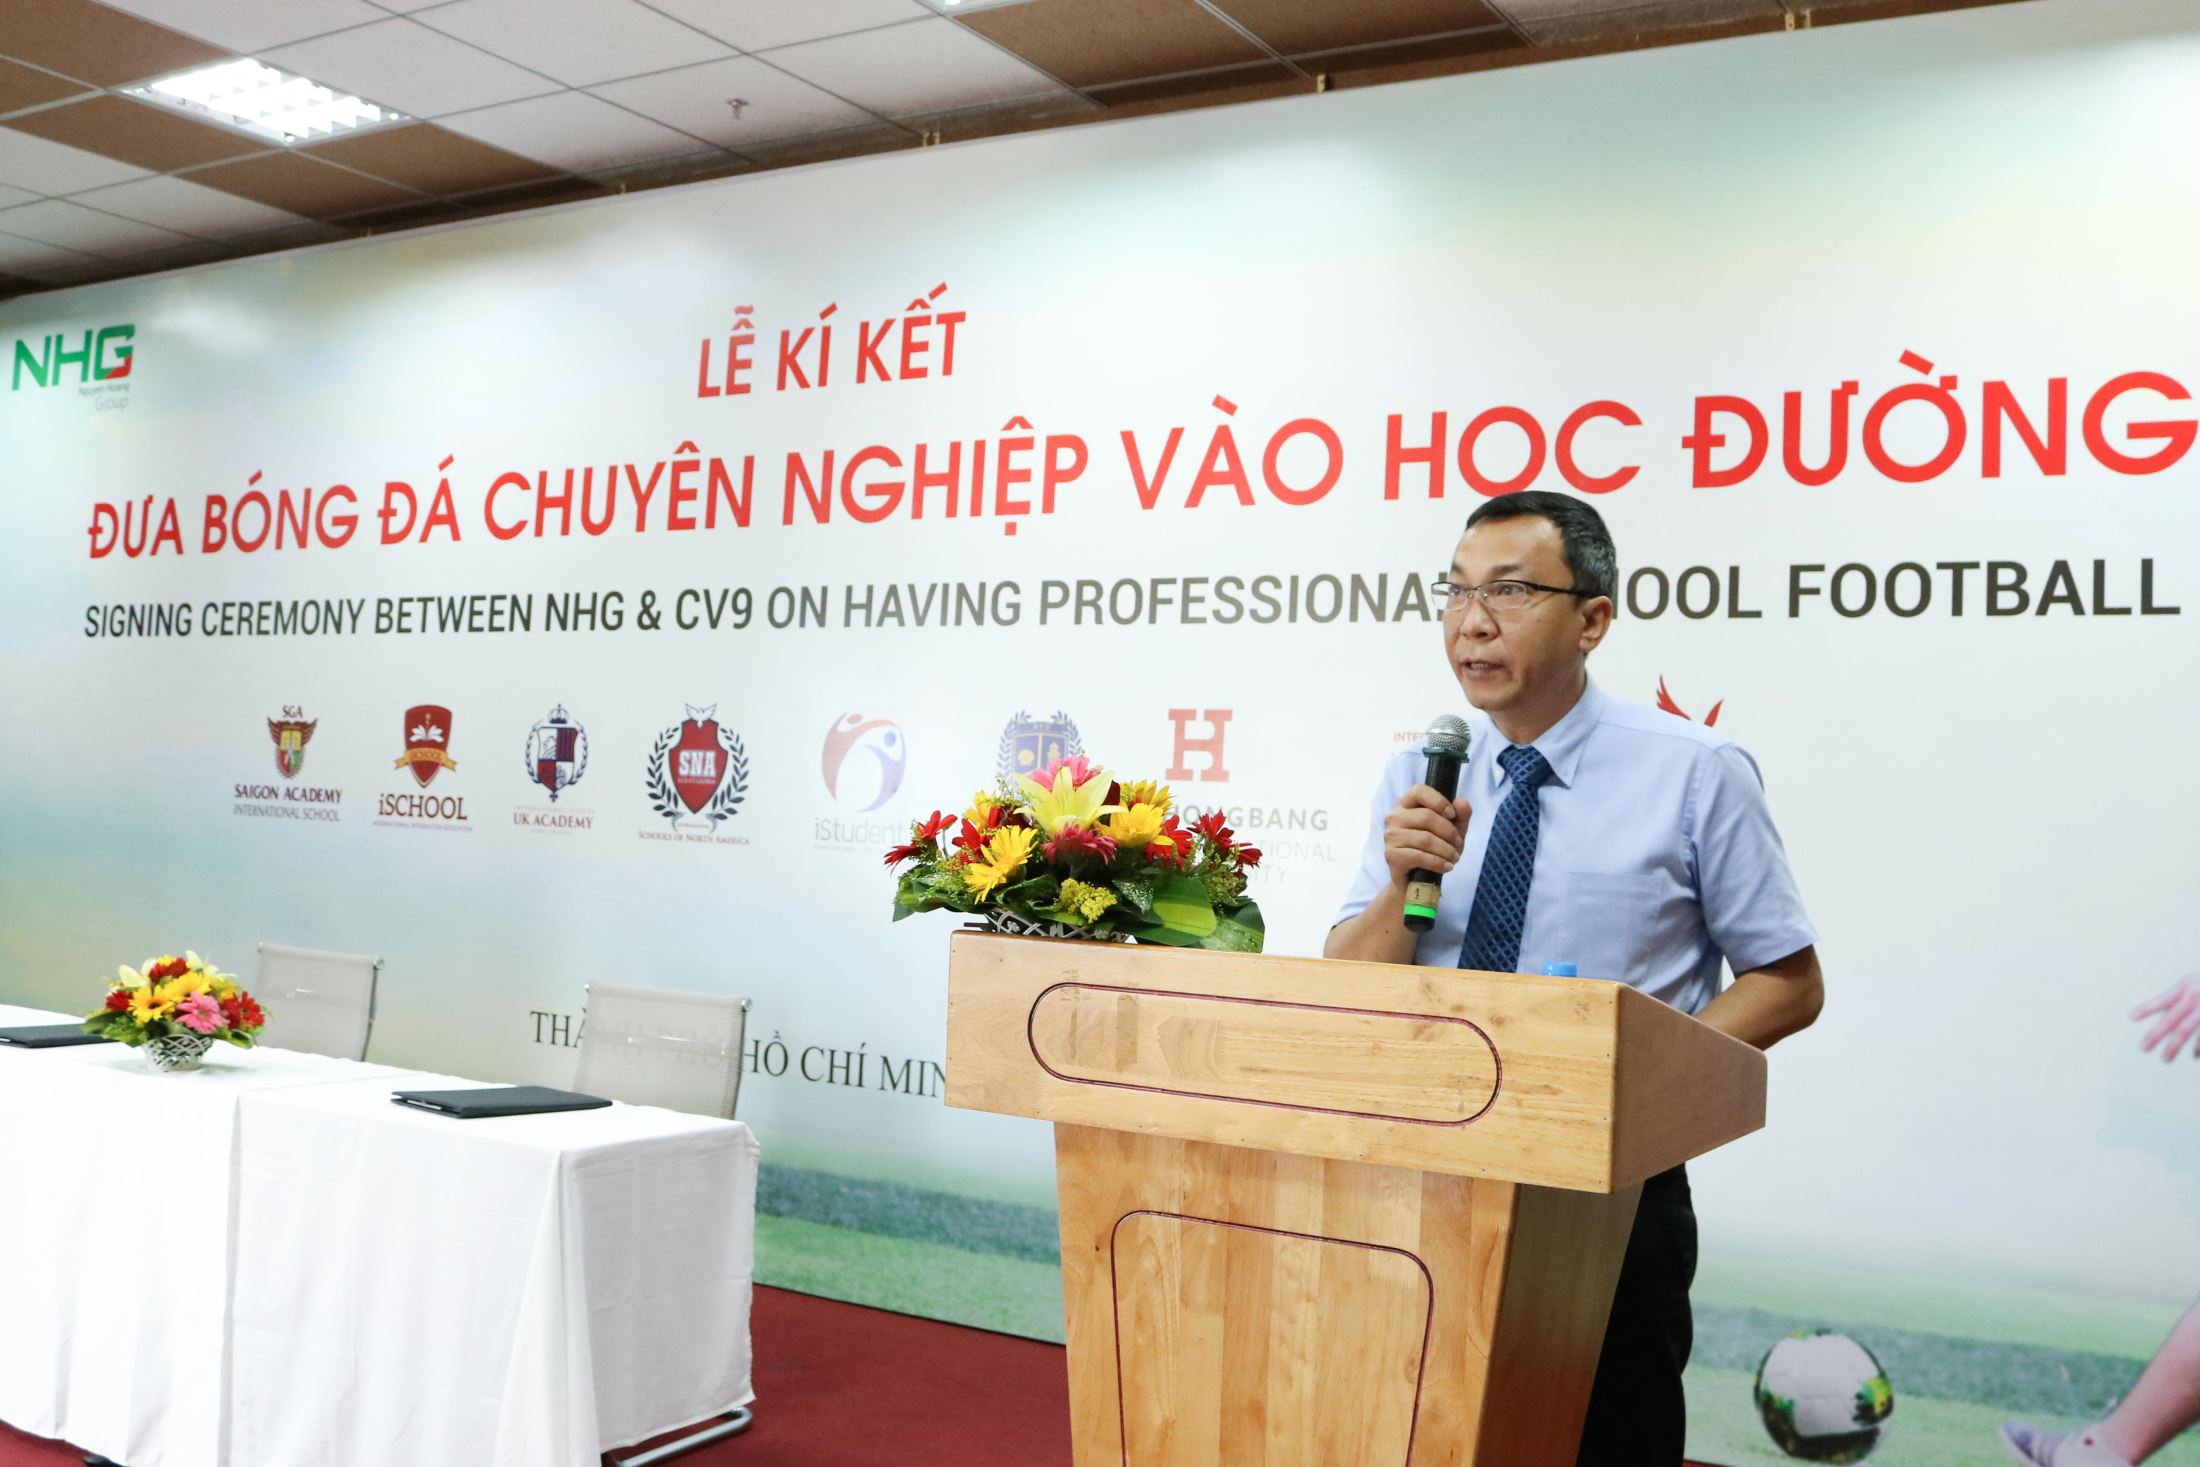 Mr. Tran Quoc Tuan, Vice President of Vietnam Football Federation (VFF) speaking at the signing ceremony.